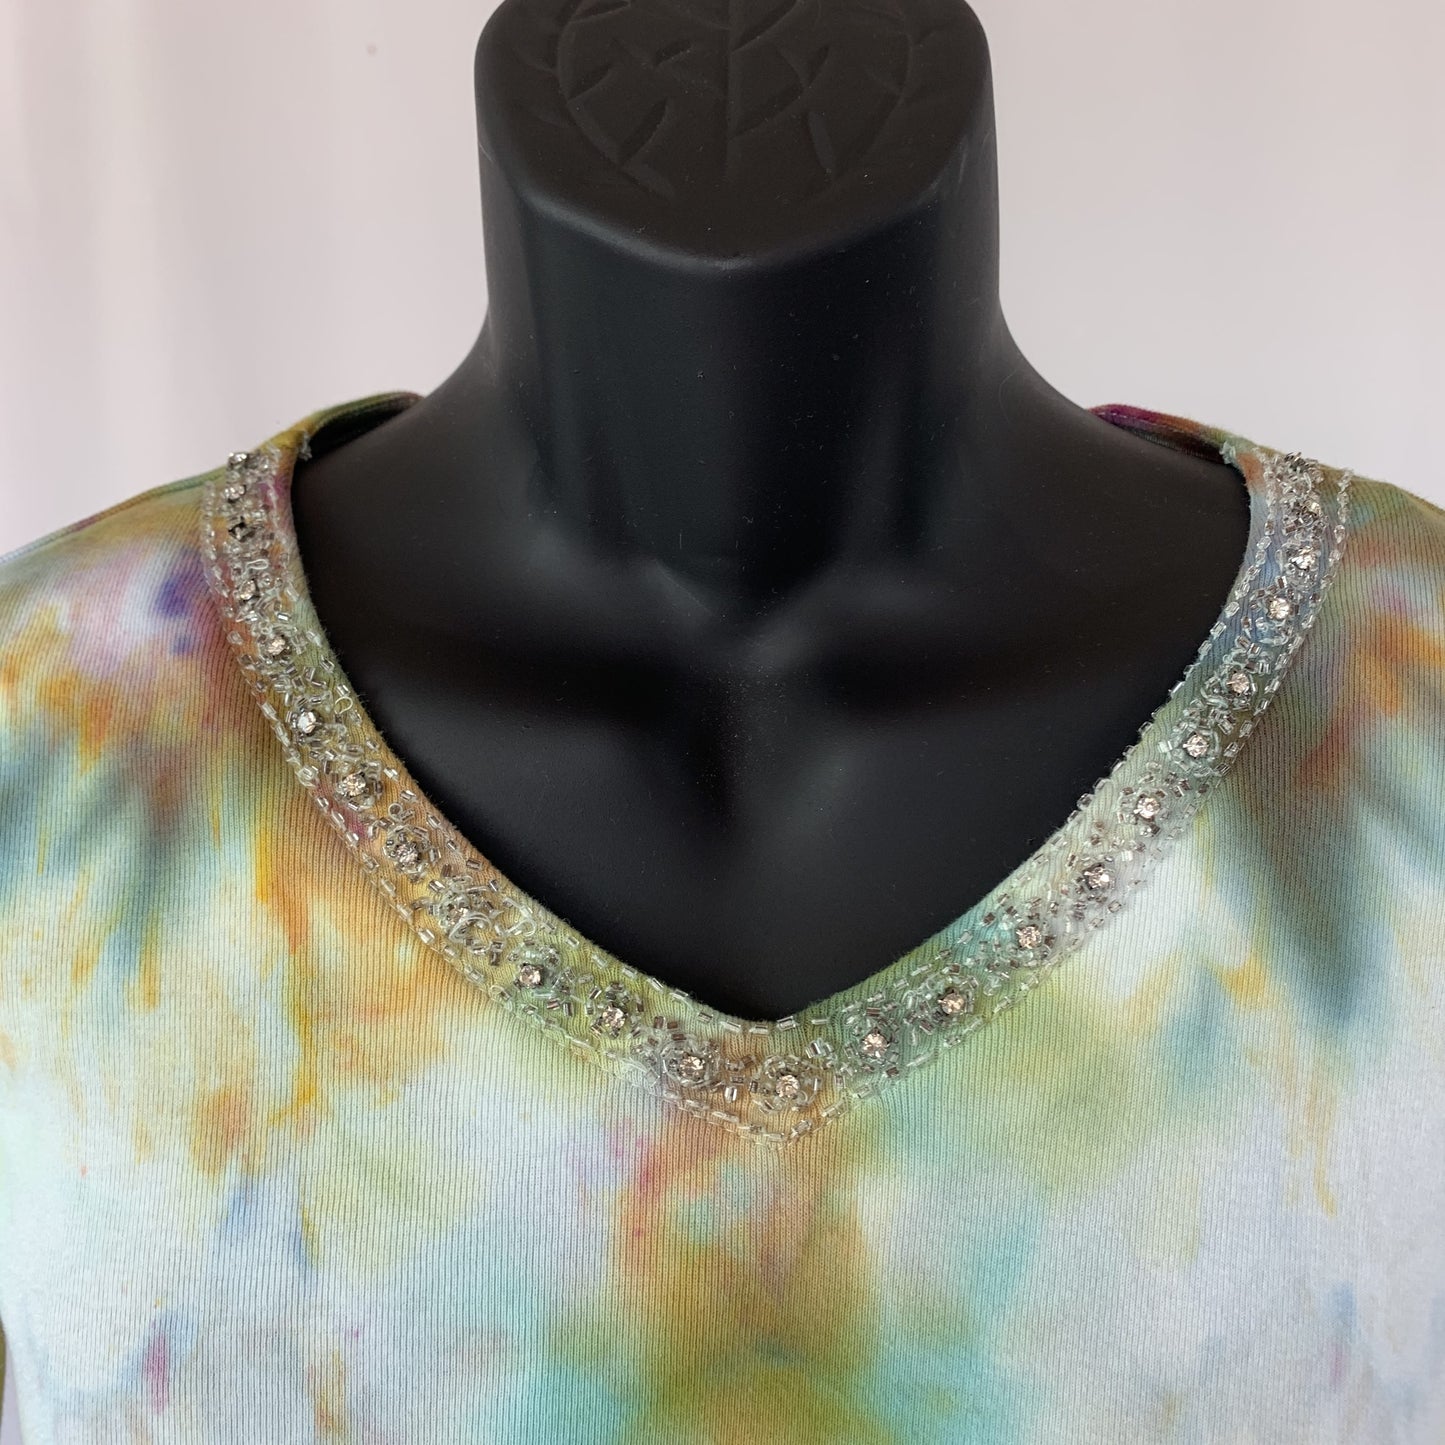 Faery Prince/ss | T-shirt | 34” chest